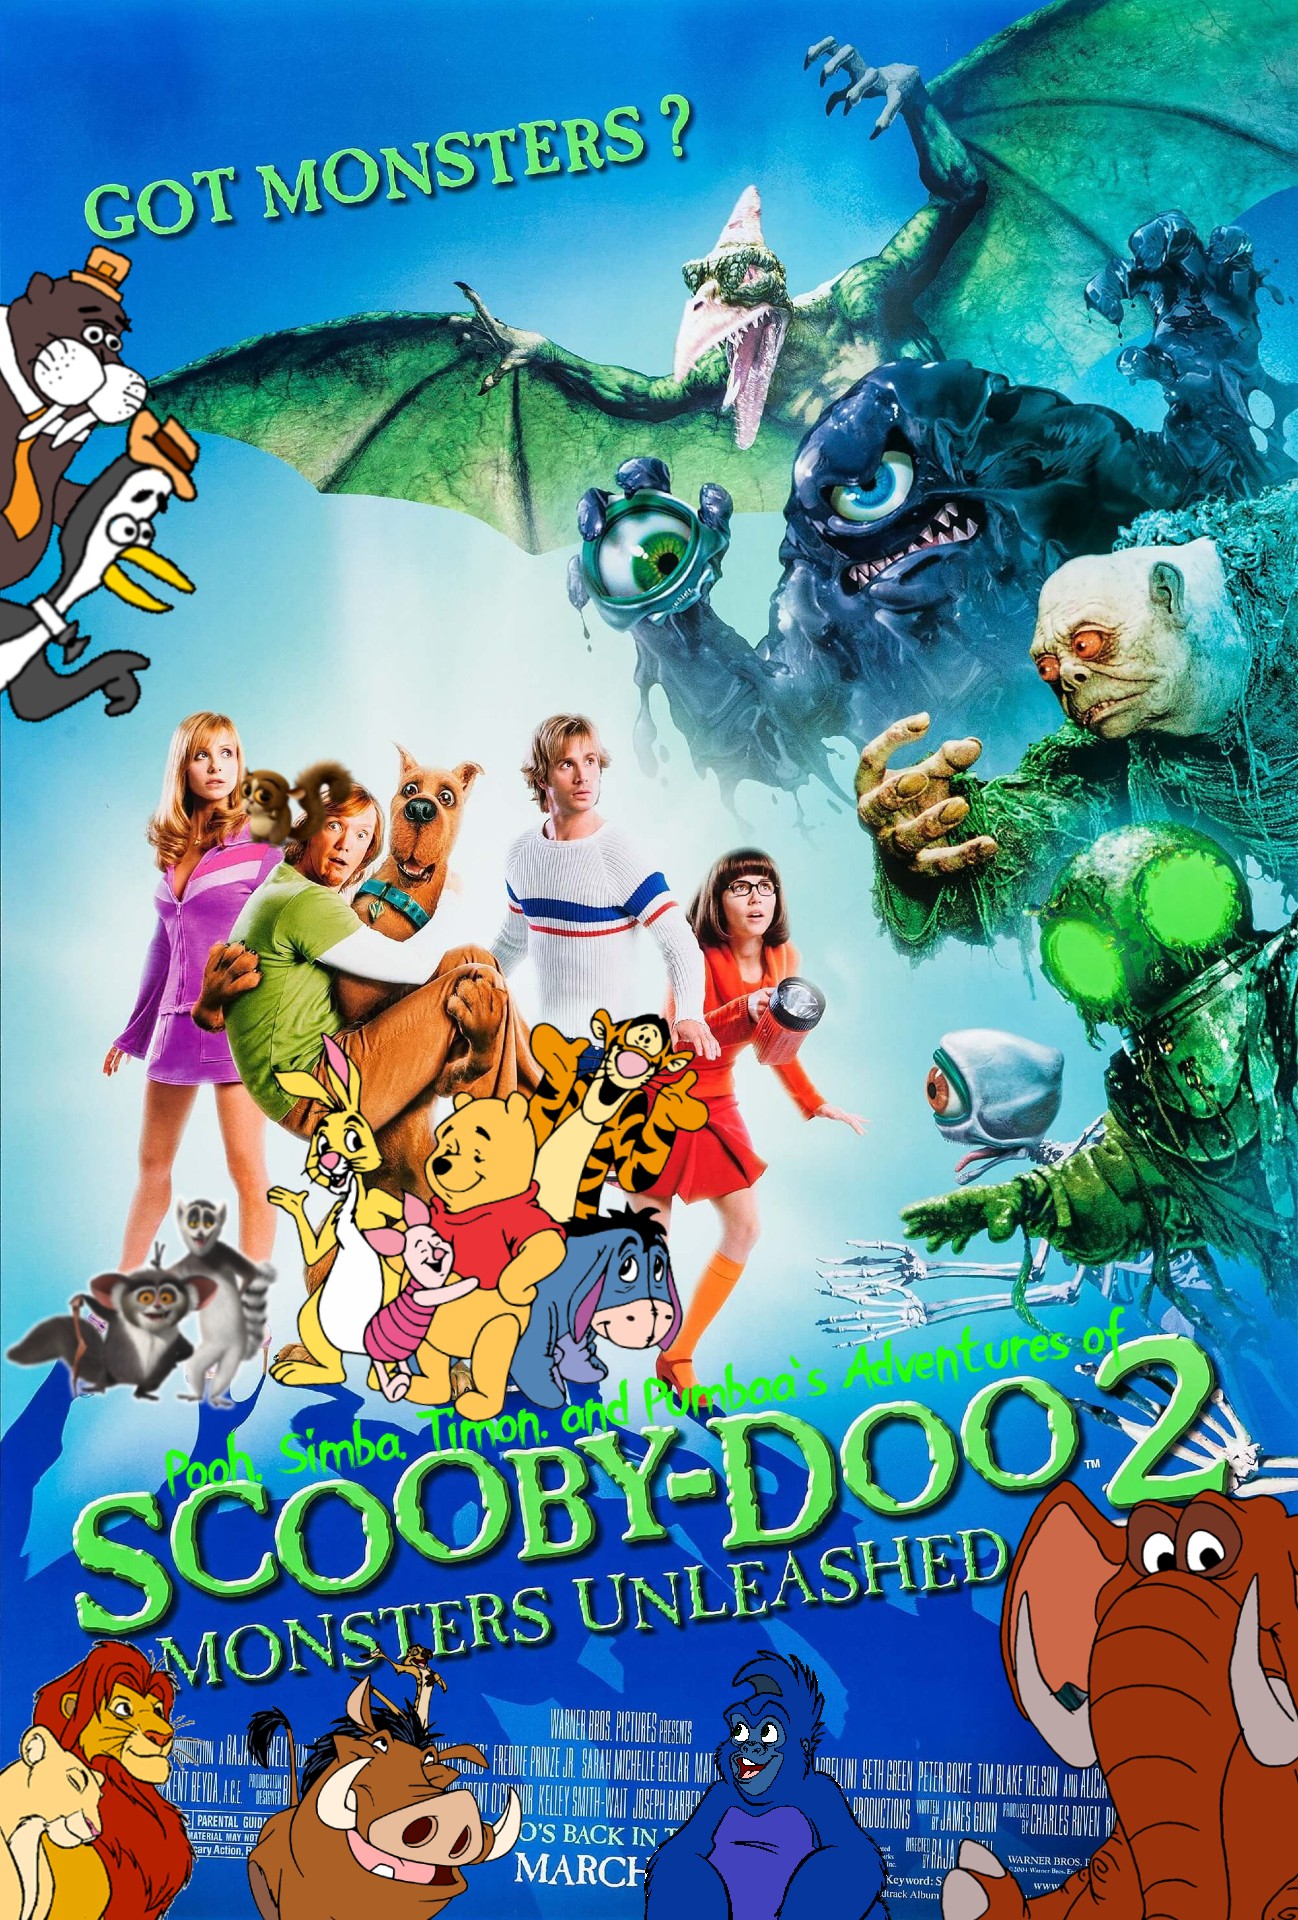 Pooh, Simba, Timon, And Pumbaa's Adventures Of Scooby Doo 2: Monsters Unleashed. Pooh's Adventures